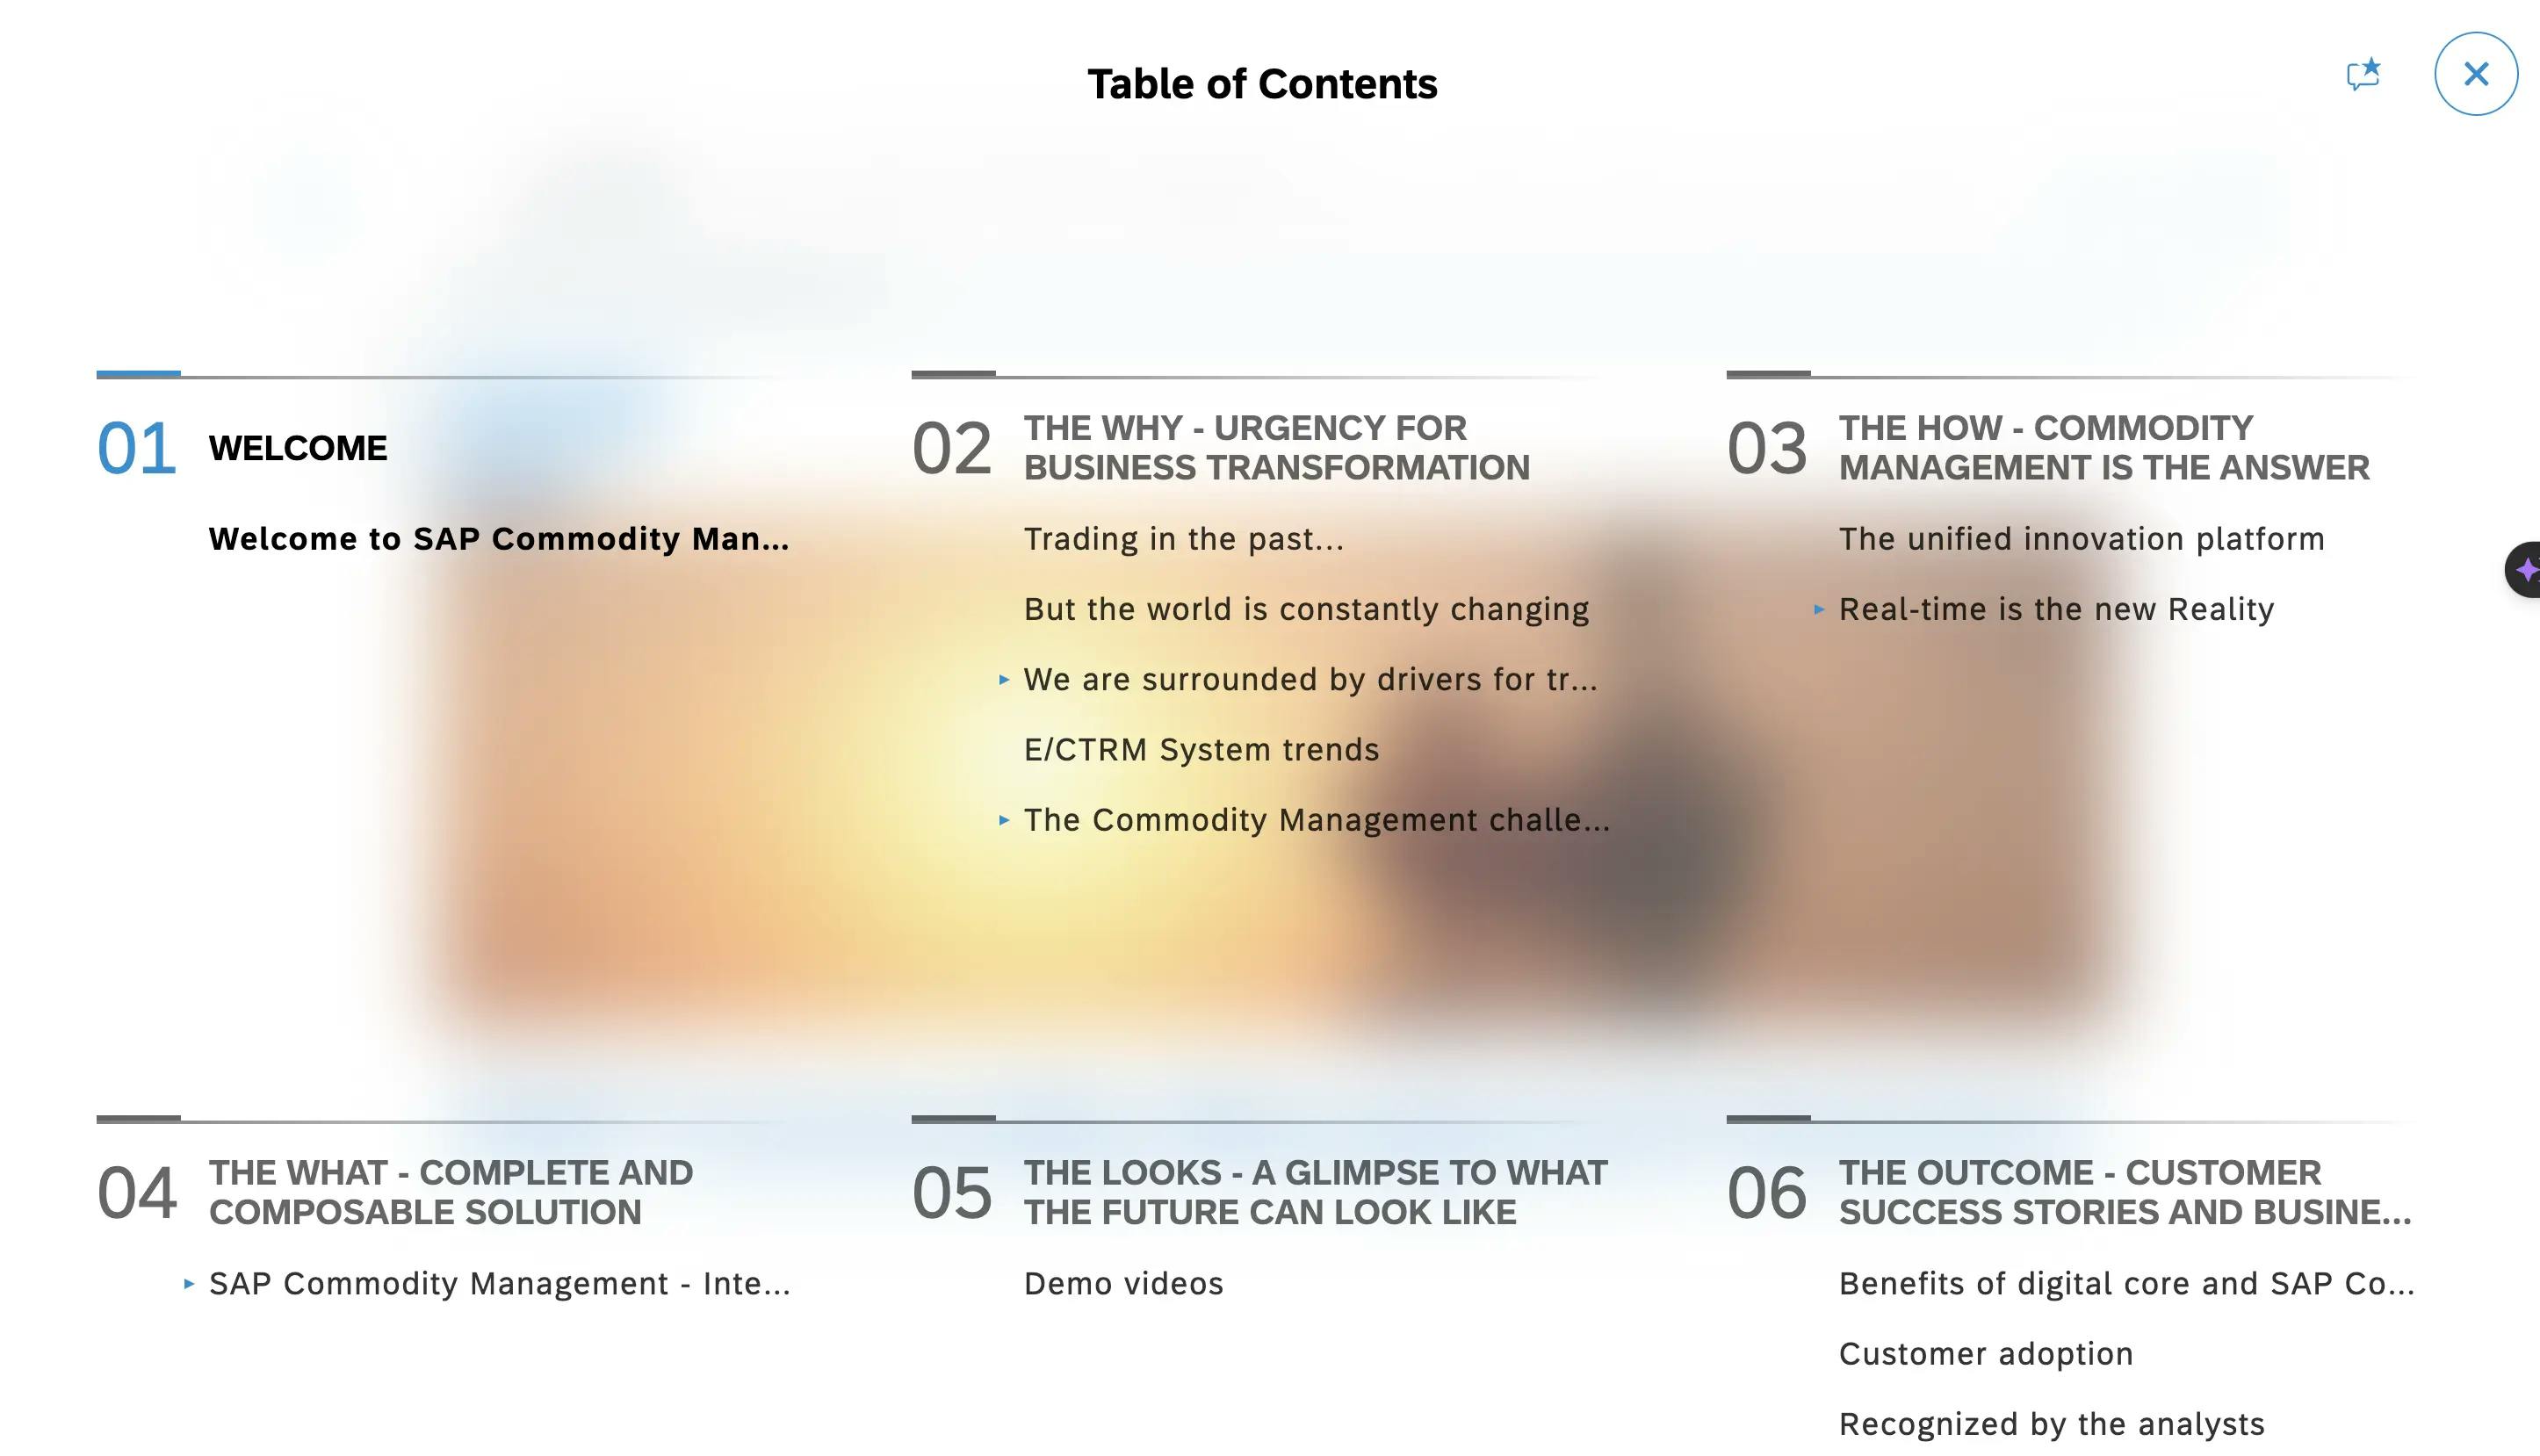 Table of contents view where users can directly navigate to a slide.